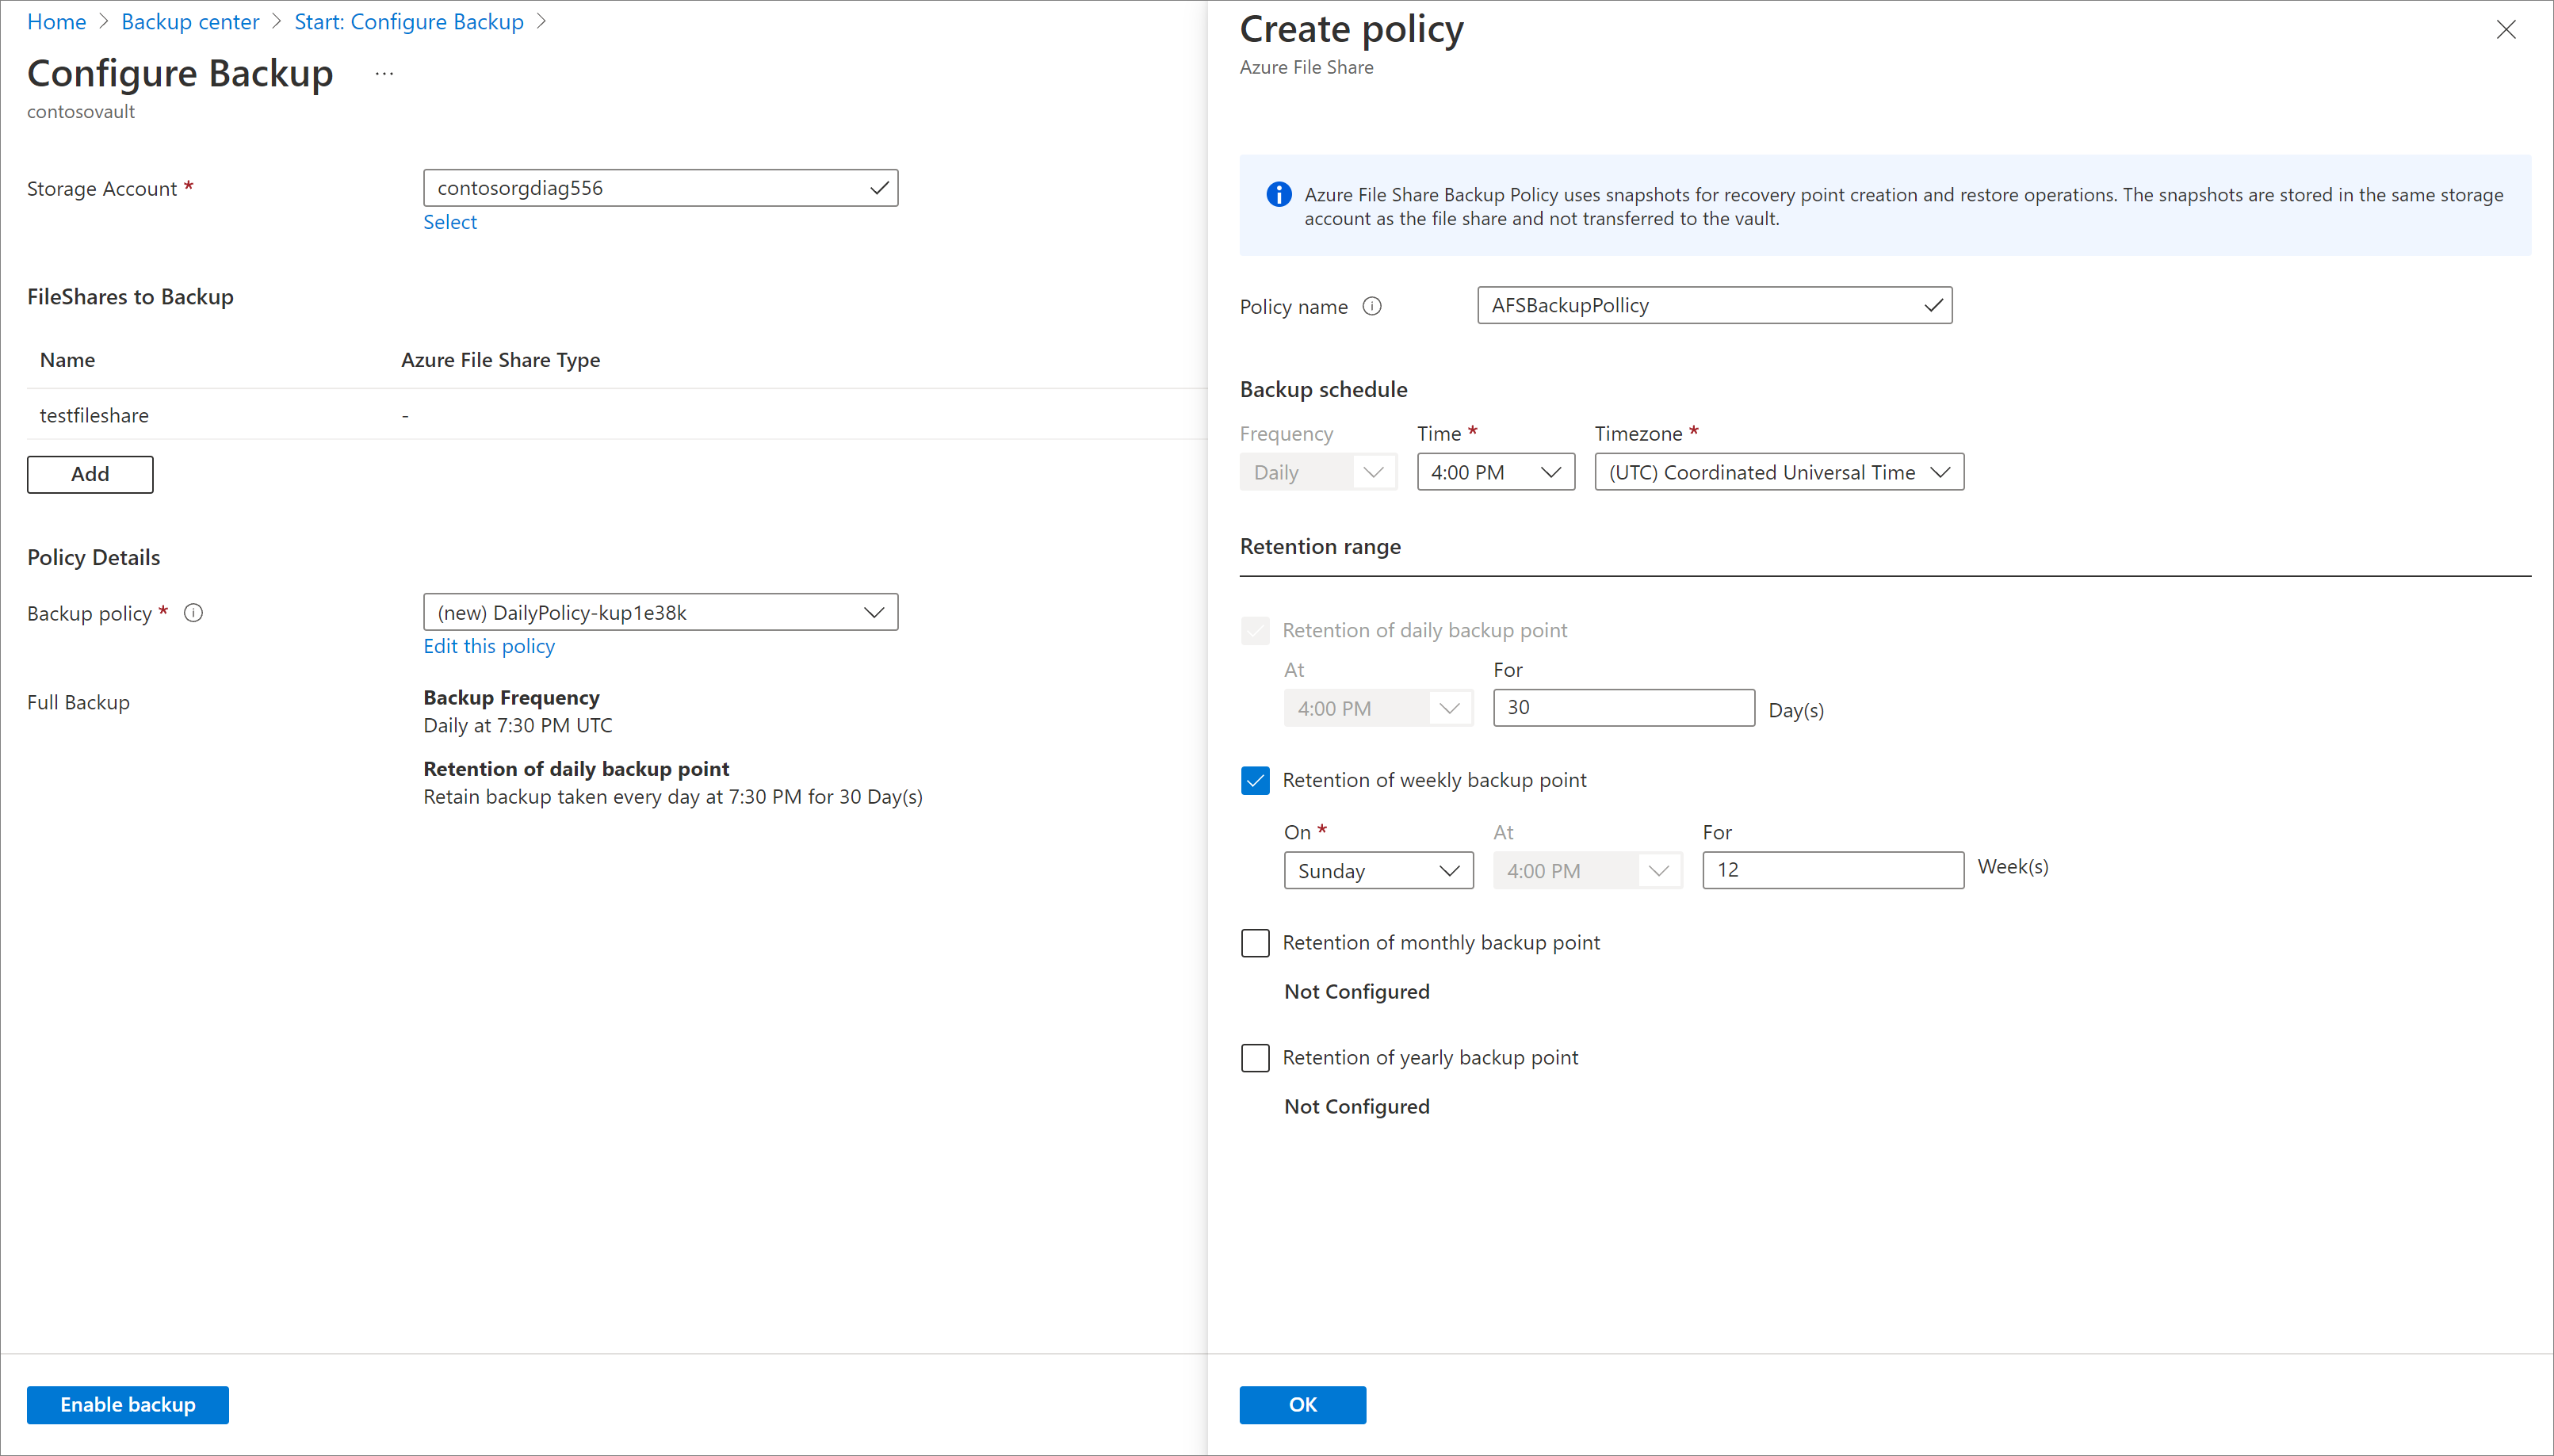 Screenshot showing to provide policy name and retention values.